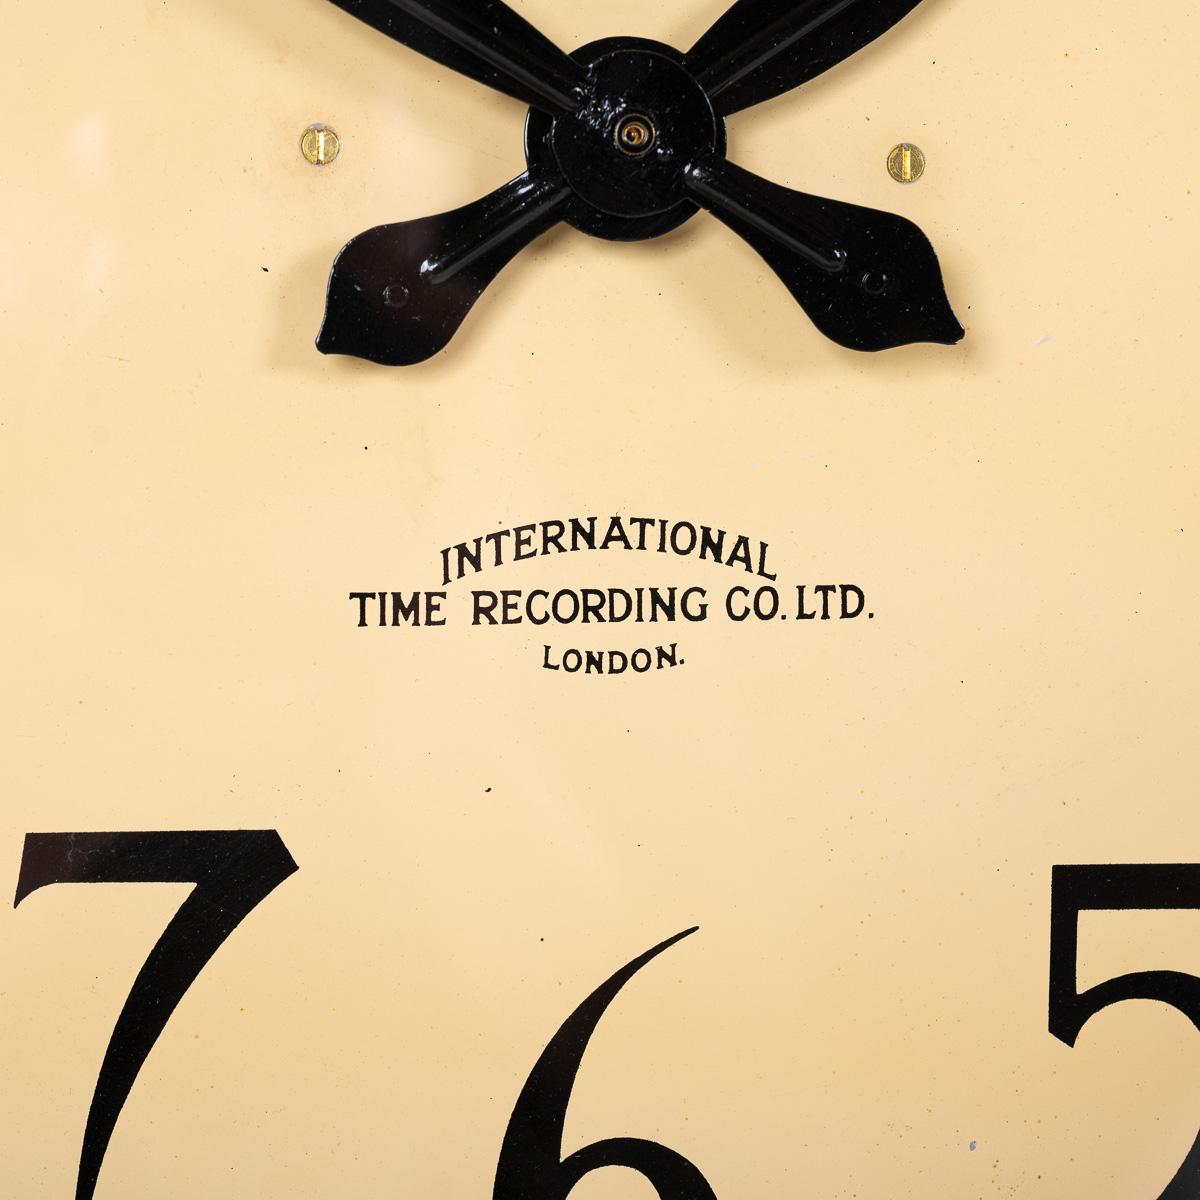 British Extra Large Reclaimed Industrial Clock By International Time Recording Co Ltd